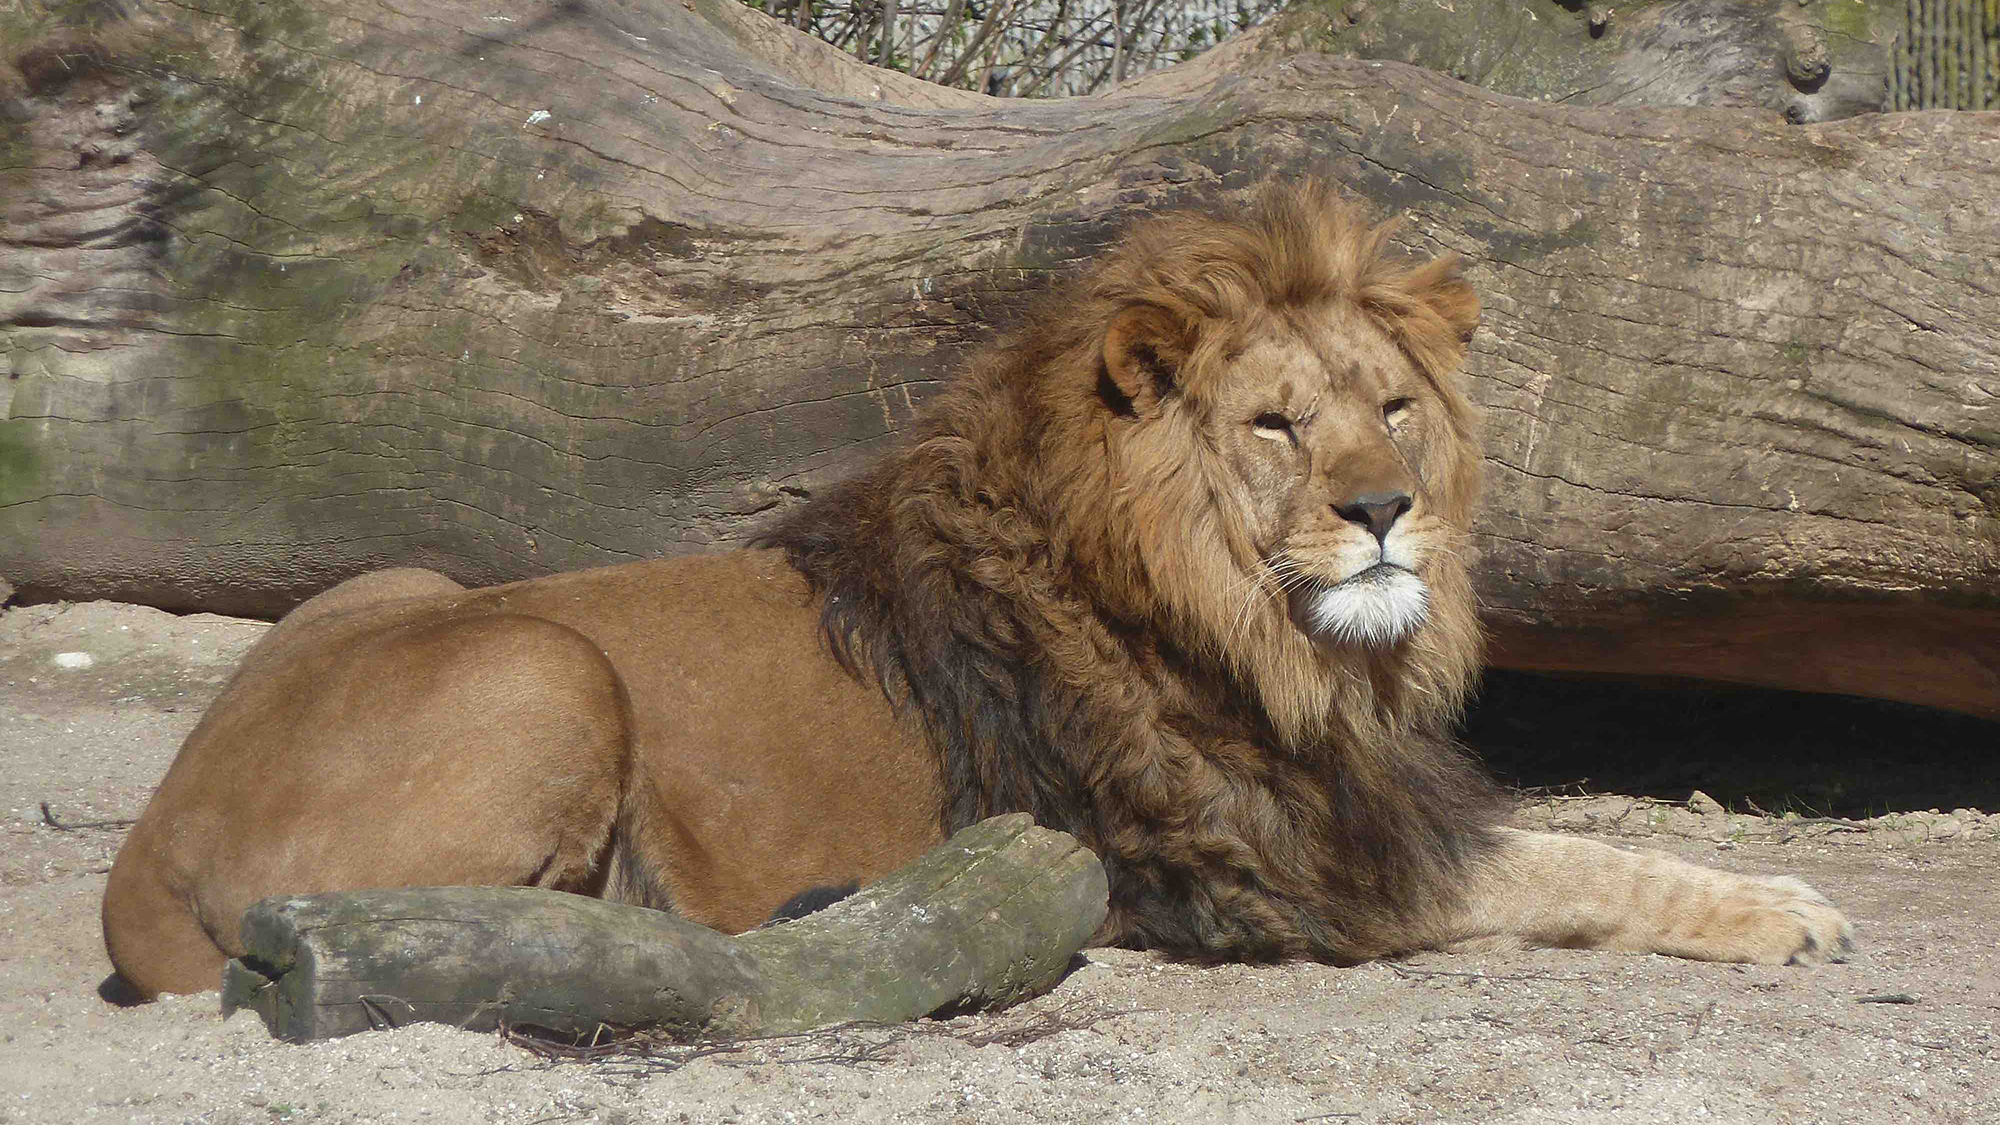 Male lion at the Copenhagen Zoo in April 2014. | Picture by Ross Barnett, researcher at the GLOBE Institute and co-author of the study.